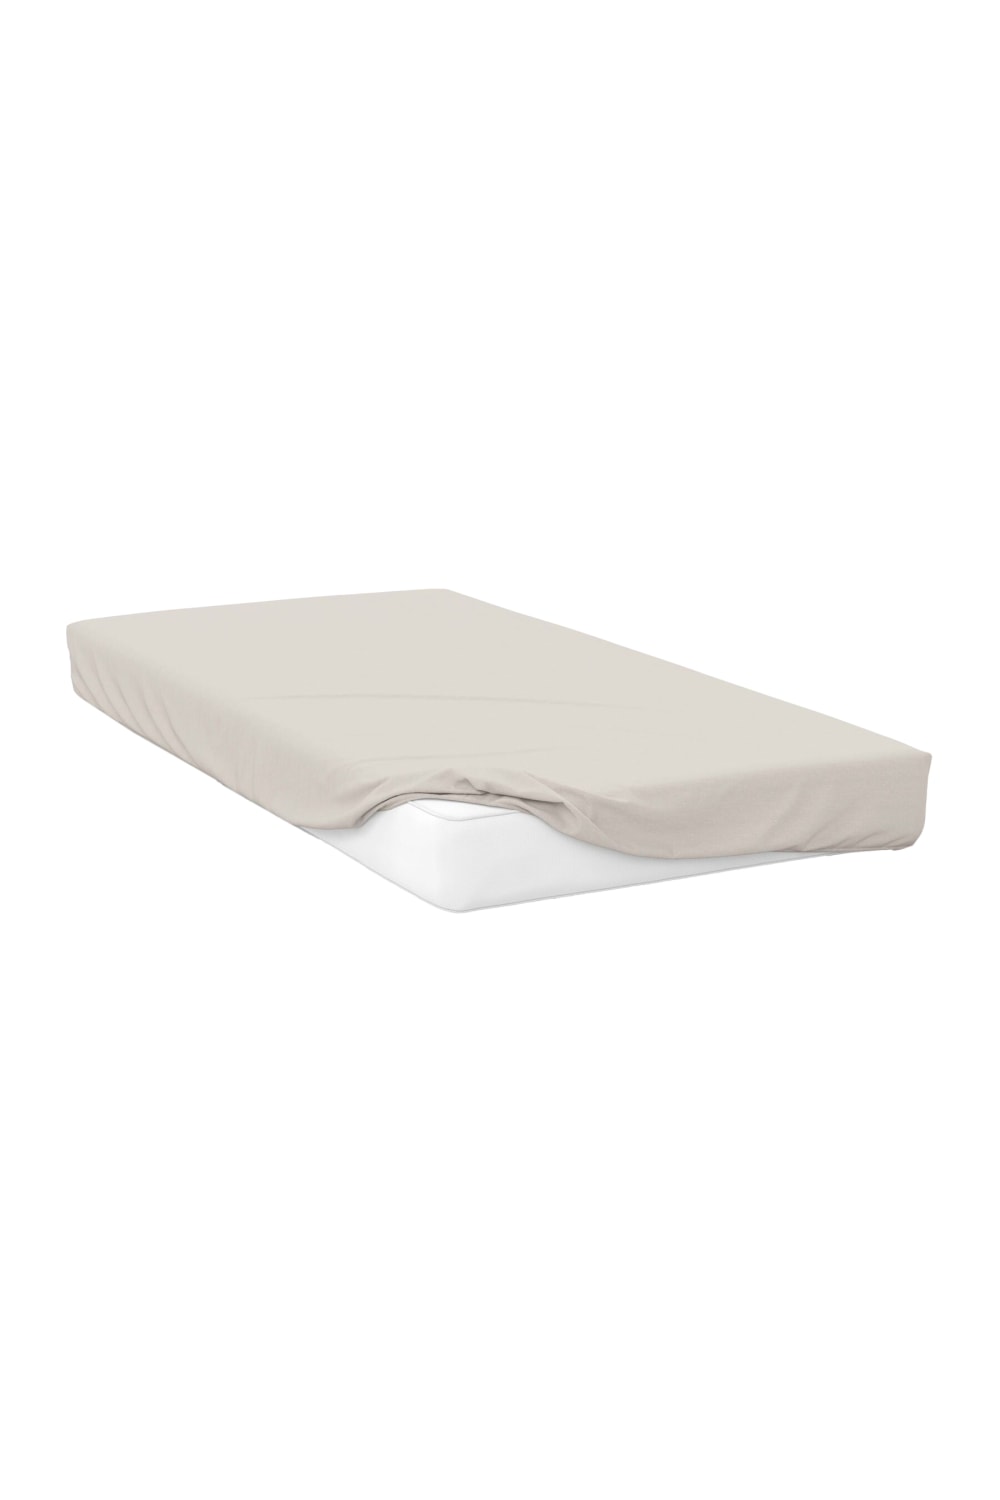 Belledorm Percale Extra Deep Fitted Sheet (Ivory) (King) (UK - Superking)